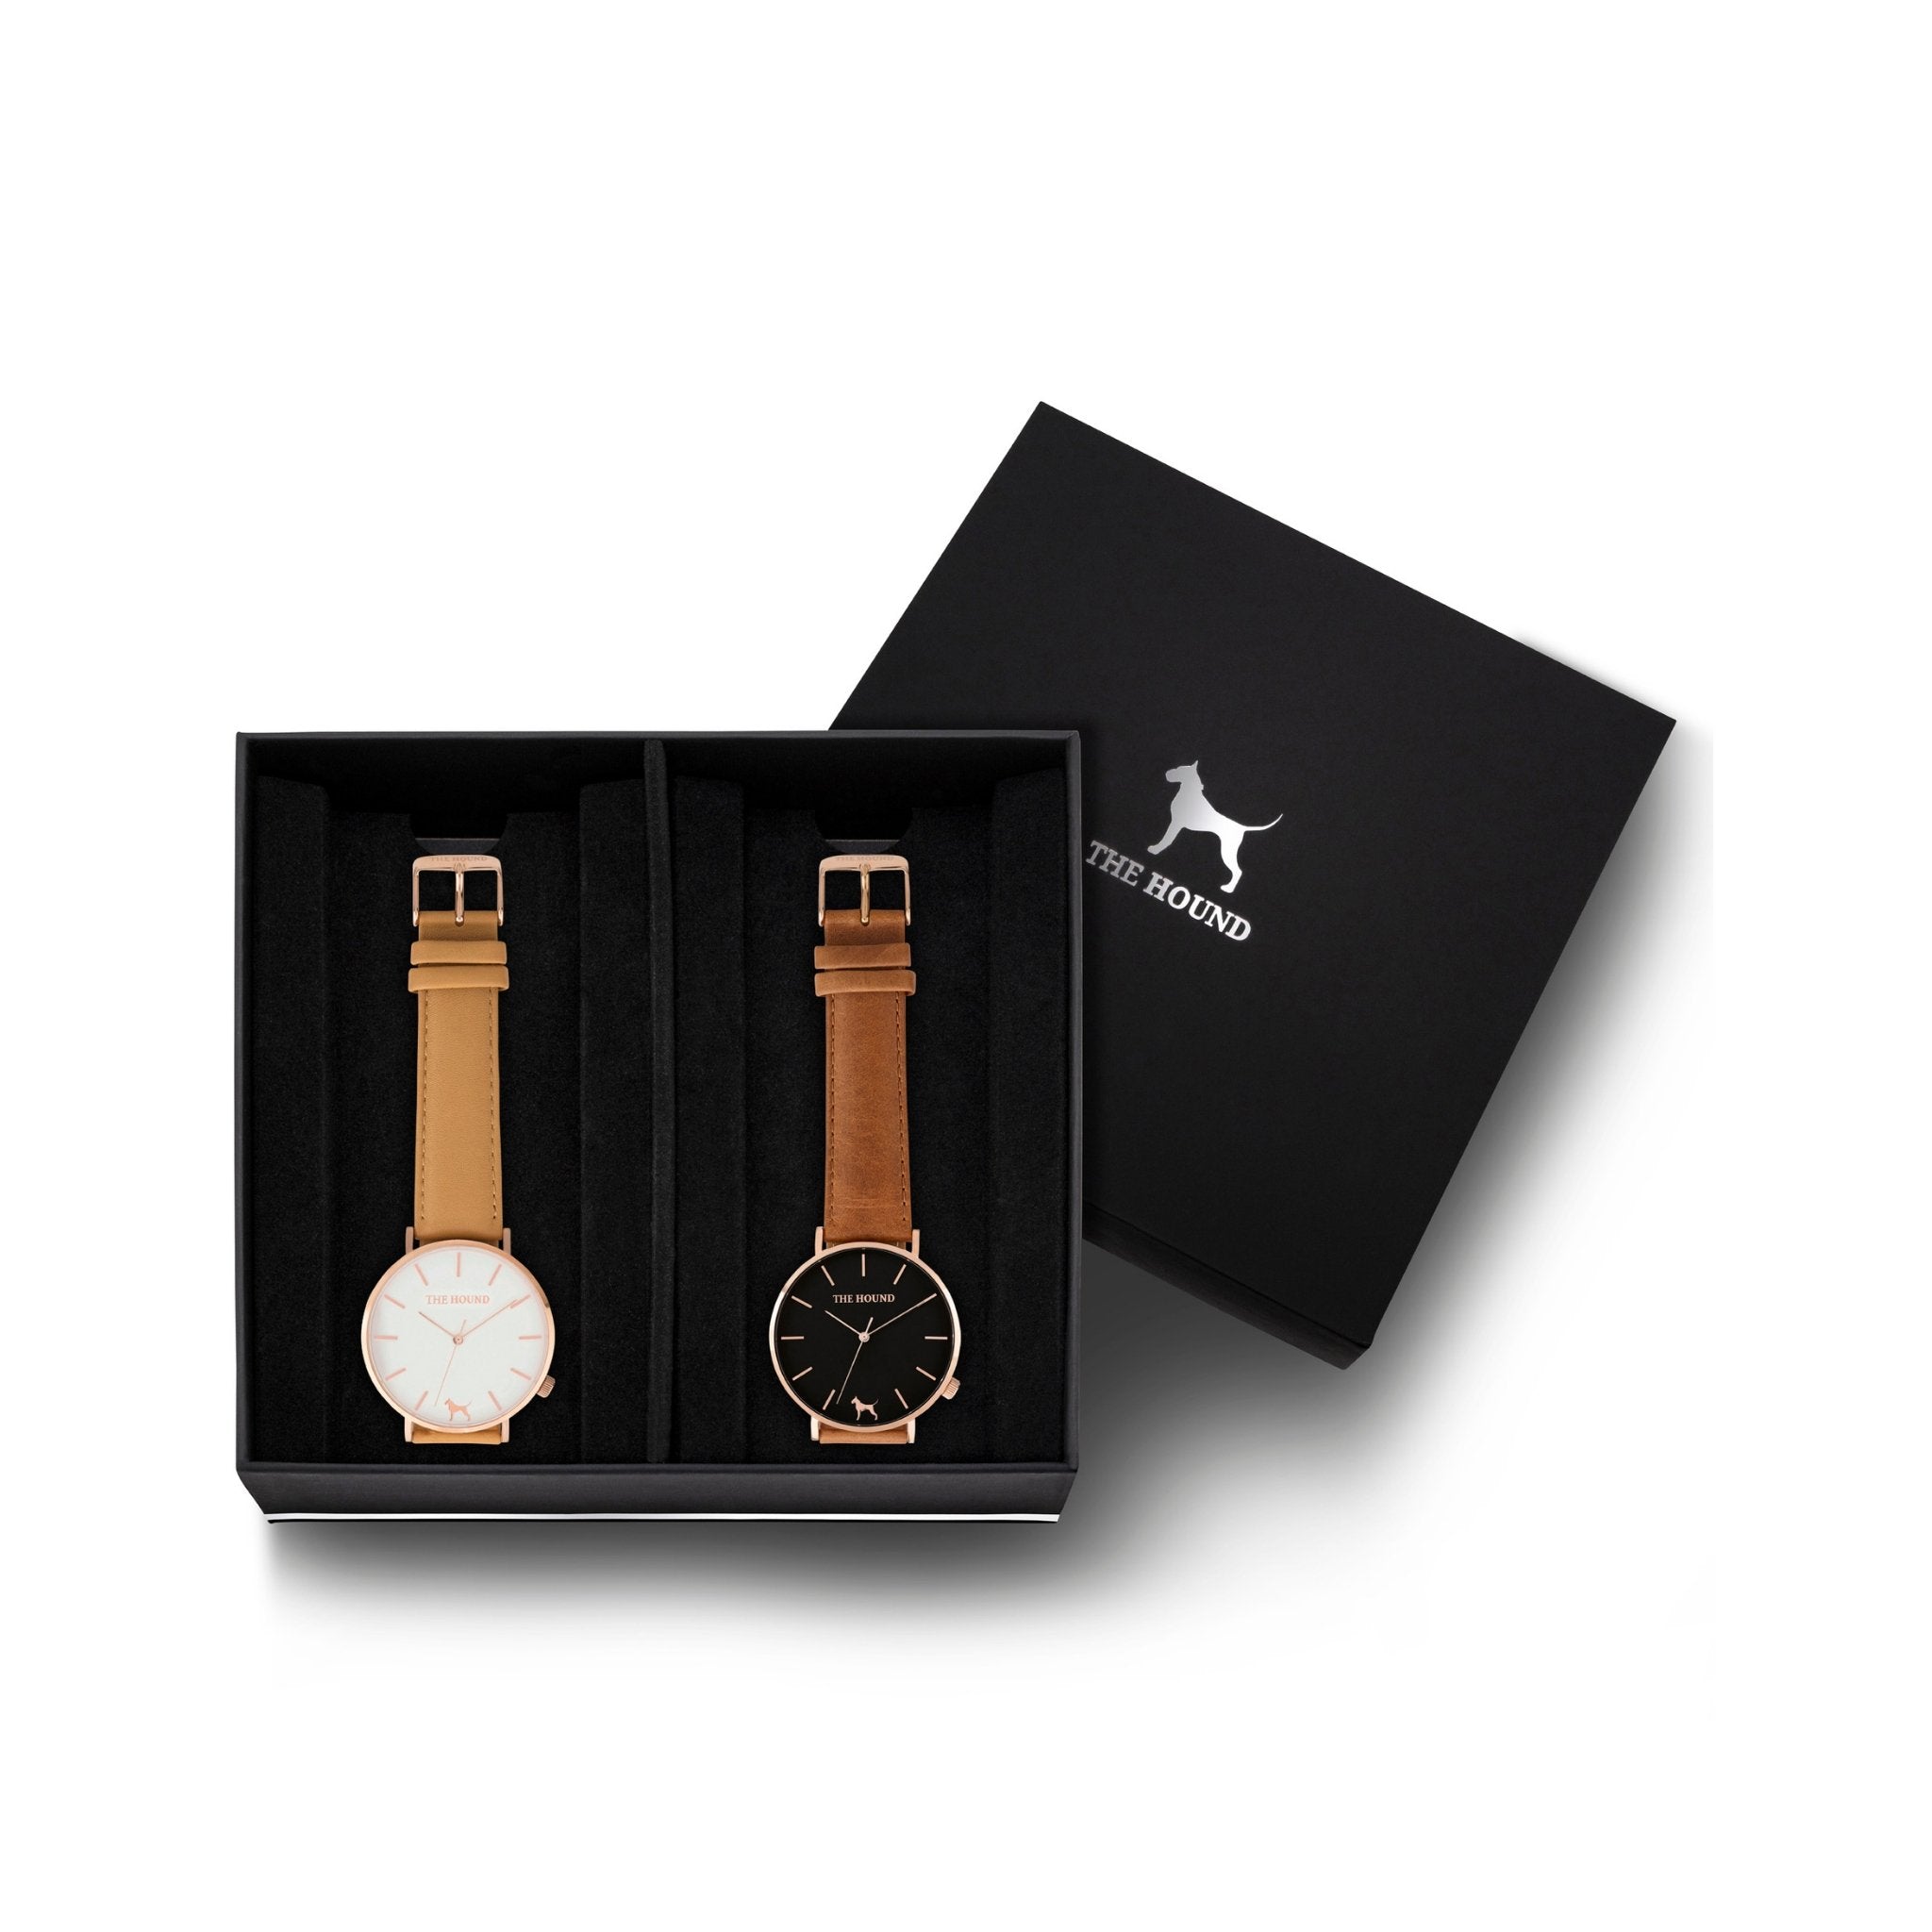 Custom gift set - Rose gold and white watch with stitched camel genuine leather band and a rose gold and black watch with stitched tan genuine leather band